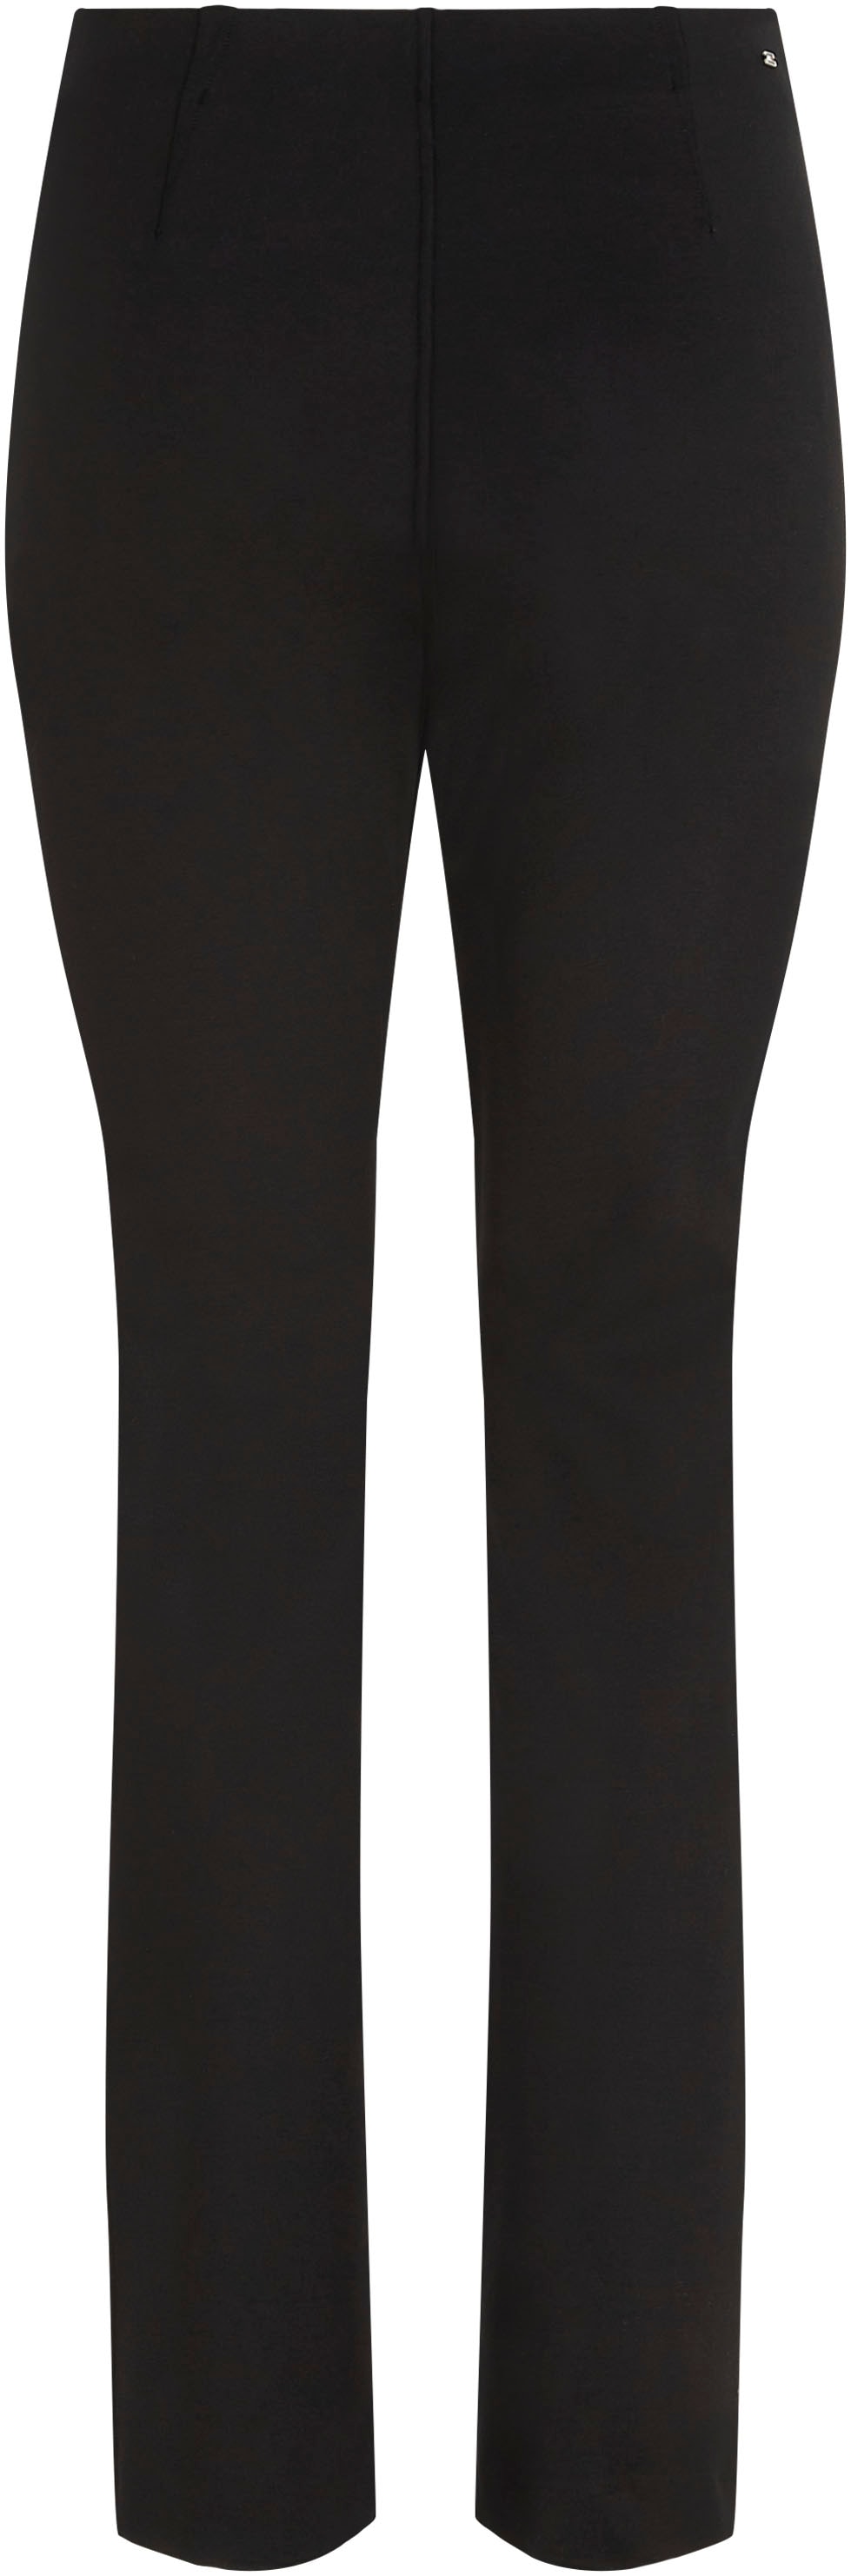 CURVE SLIM Tommy PANT«, »CRV bei KNITTED Jerseyhose OTTO Hilfiger Curve ELEVATD SIZE PLUS